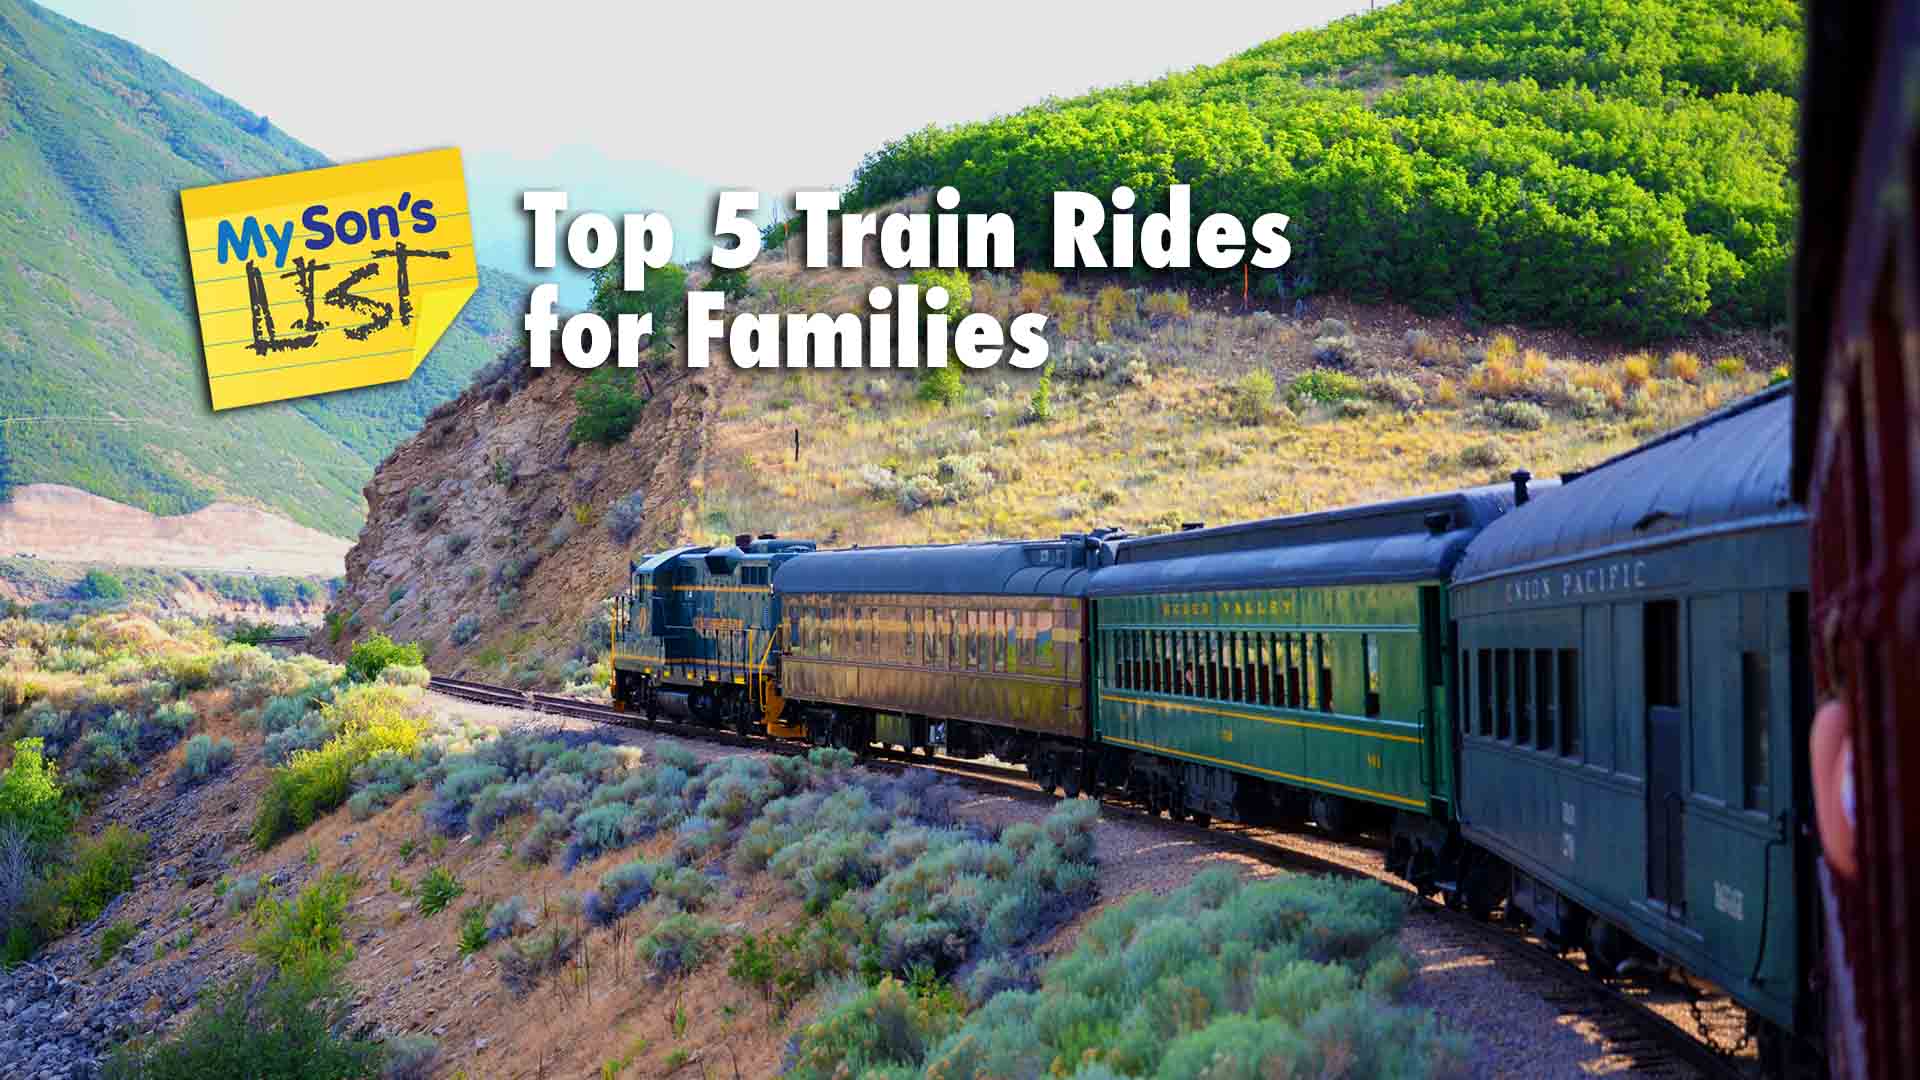 Top 5 Train Rides for Families